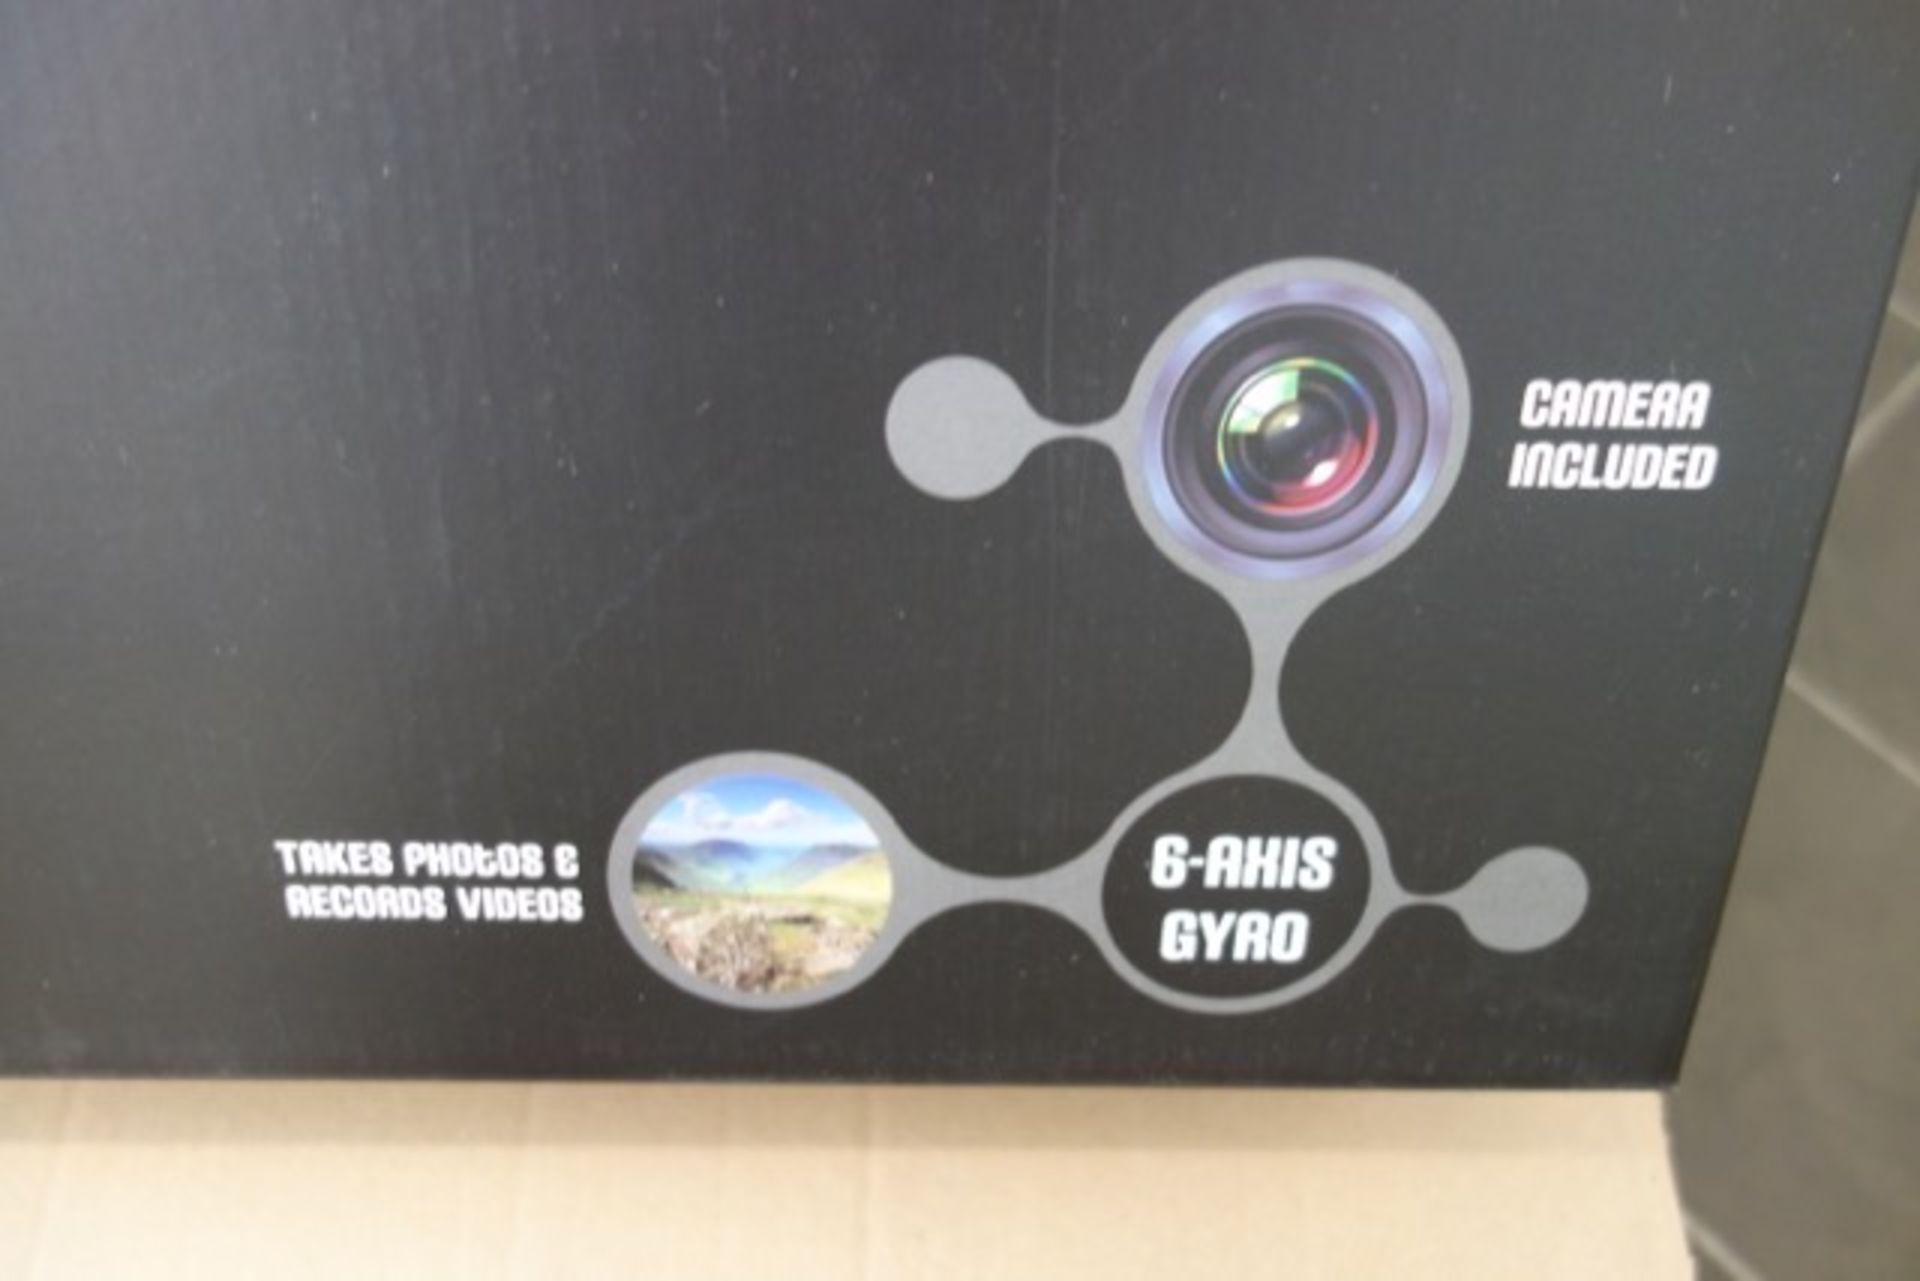 4 x Brand New Global Gizmos 2.4GHZ Remote Control Drone. Takes images & recordes videos, 6 axis - Image 2 of 4